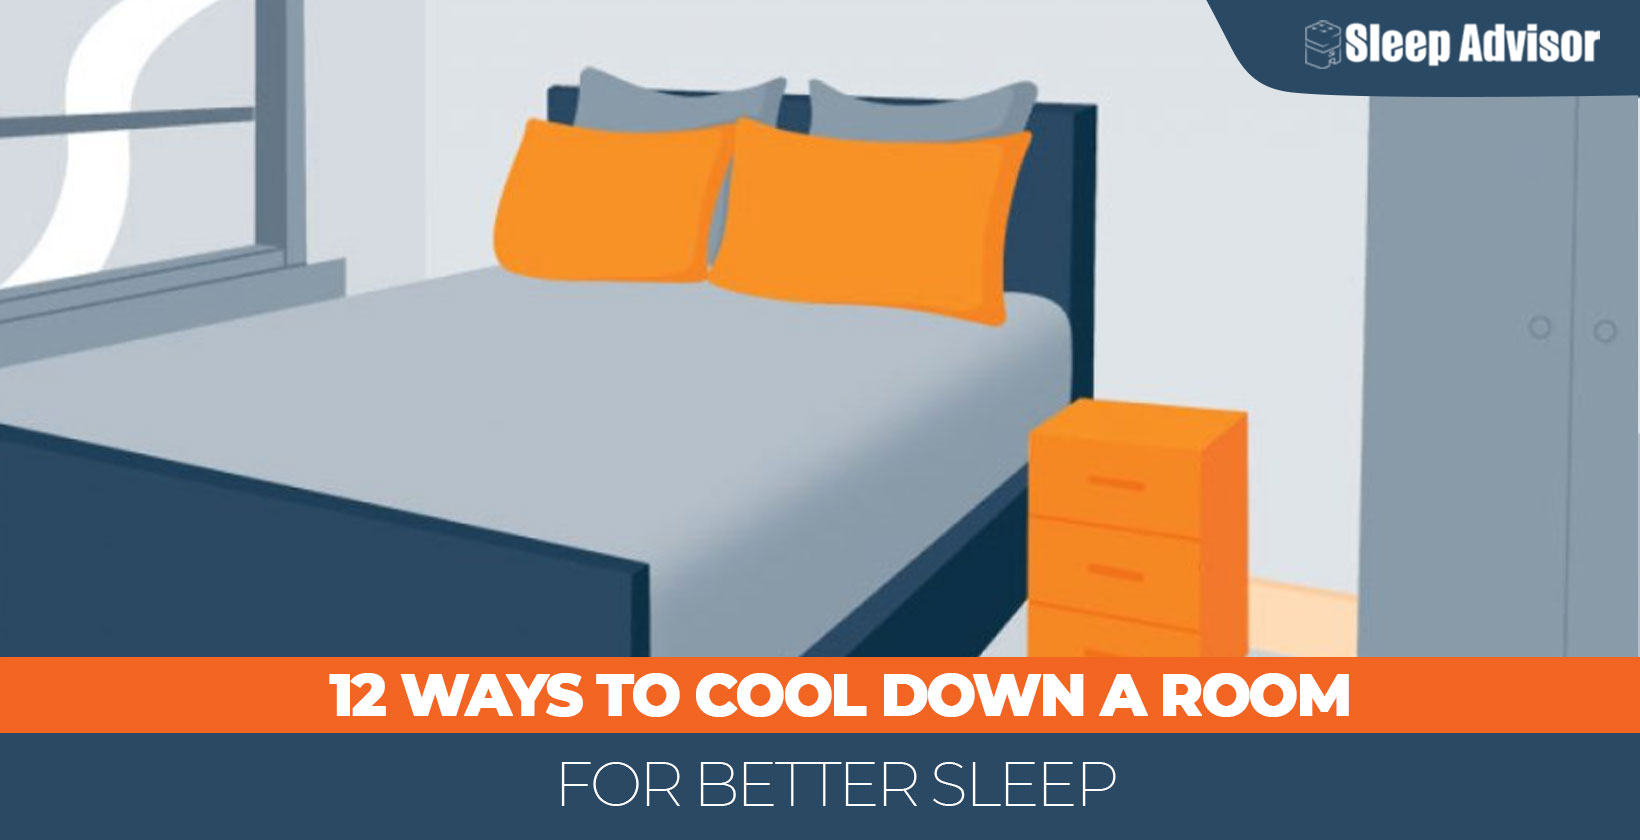 12 Ways to Cool Down a Room for Better Sleep 1640x840px